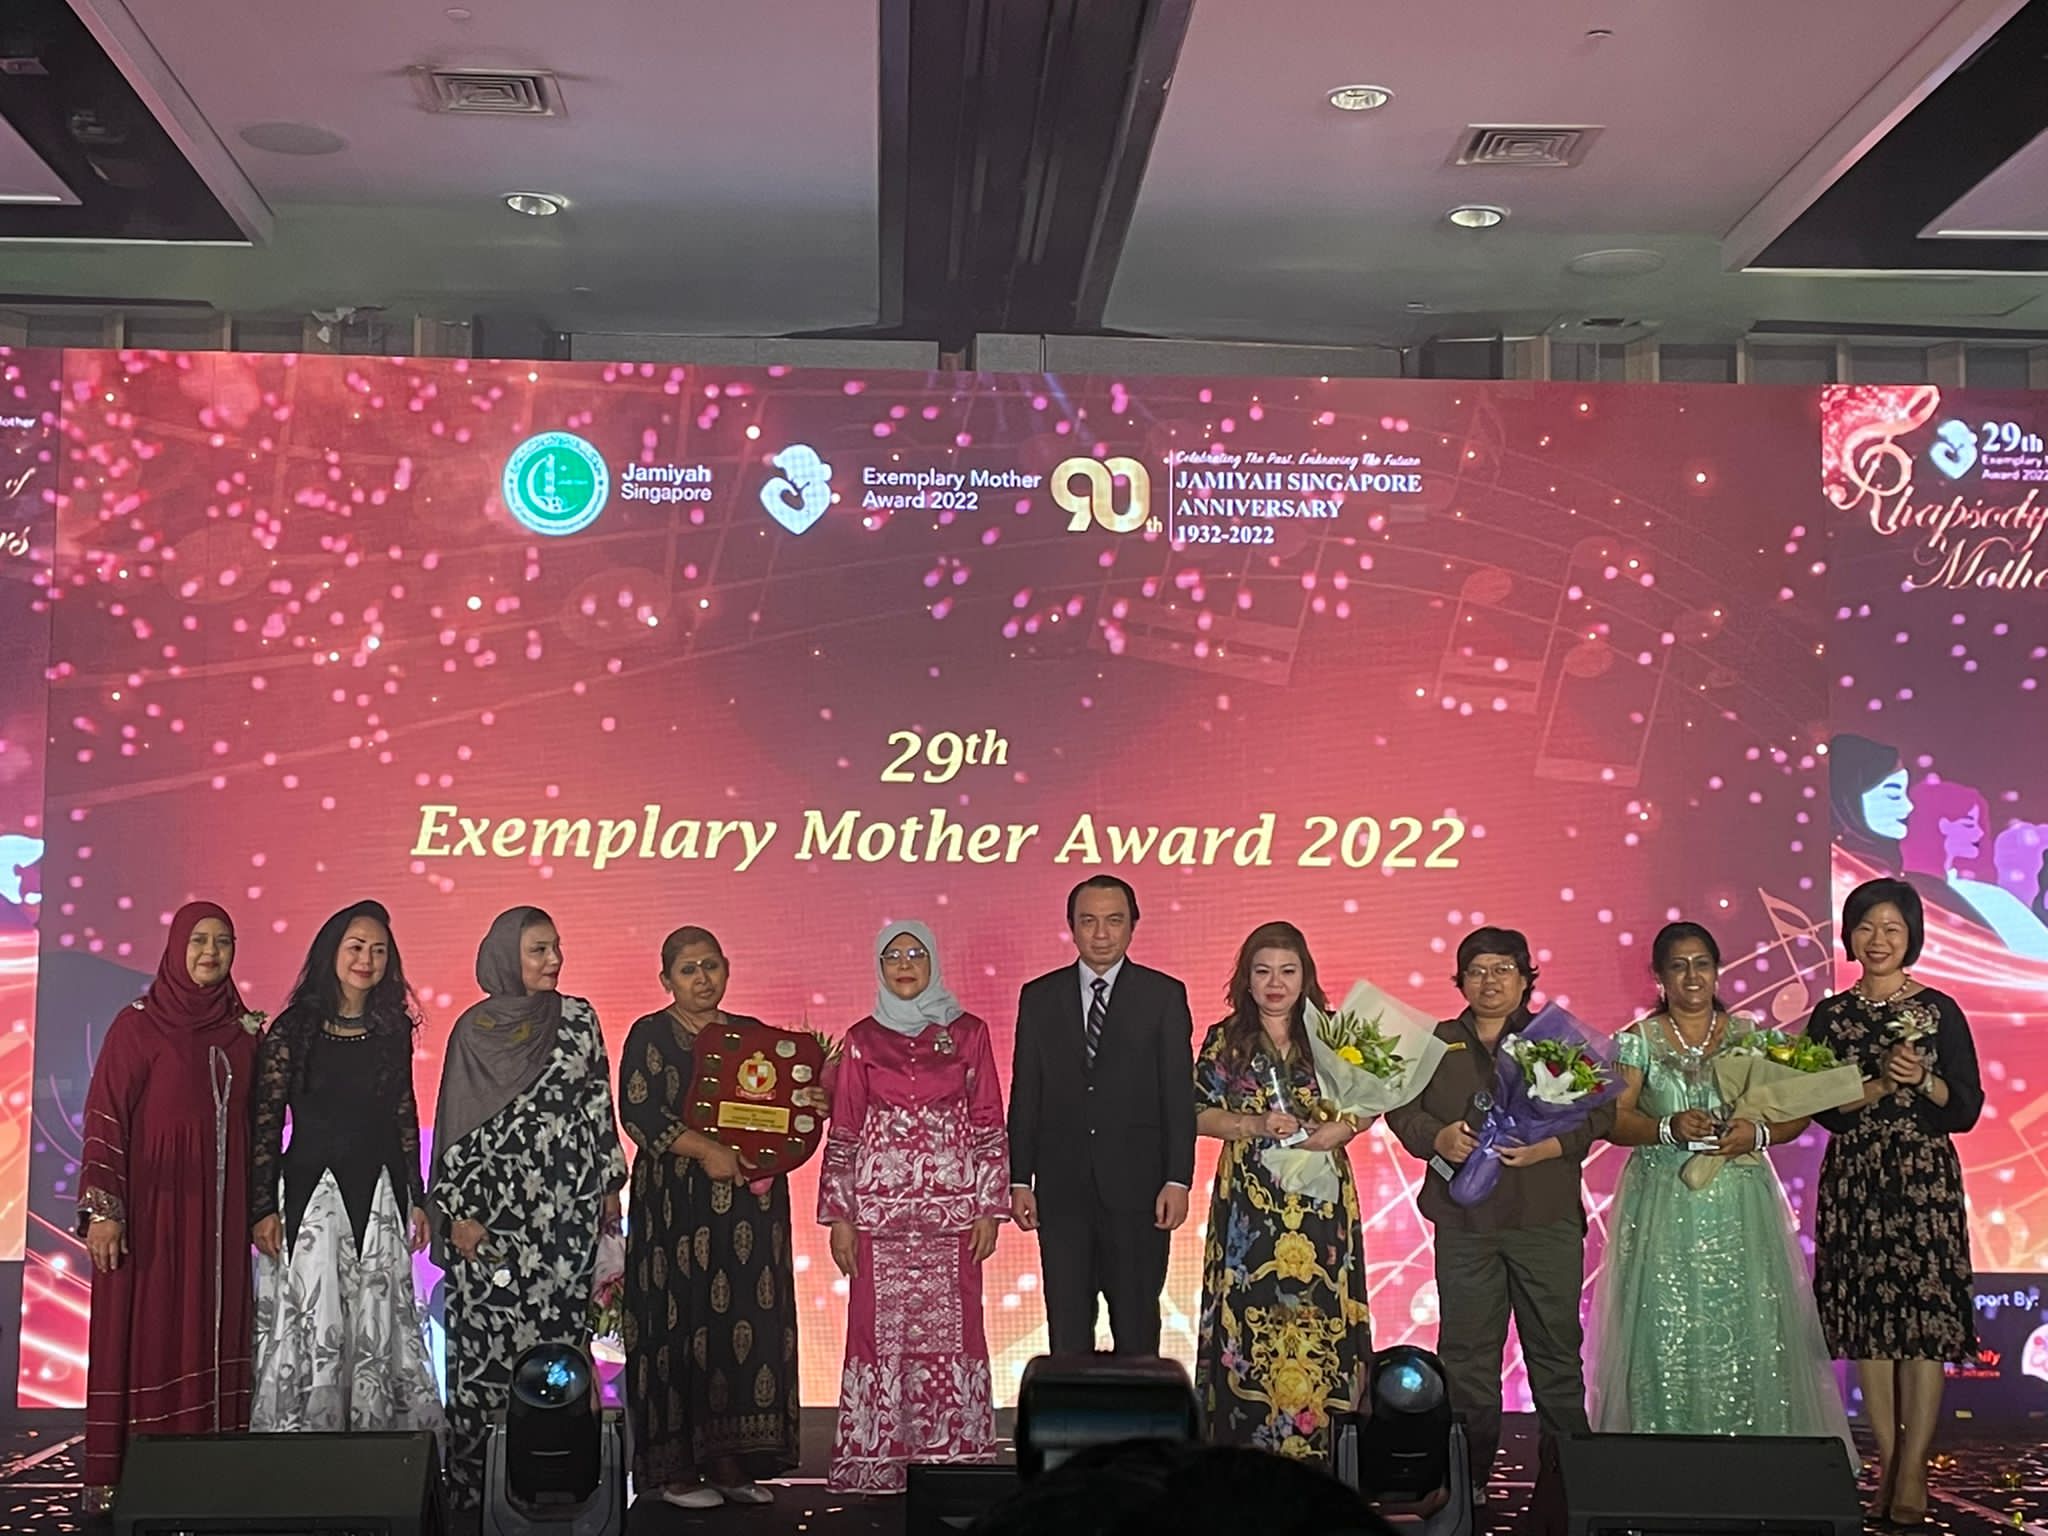 SNM Beneficiaries Win At The 29th Annual Exemplary Mother Award!